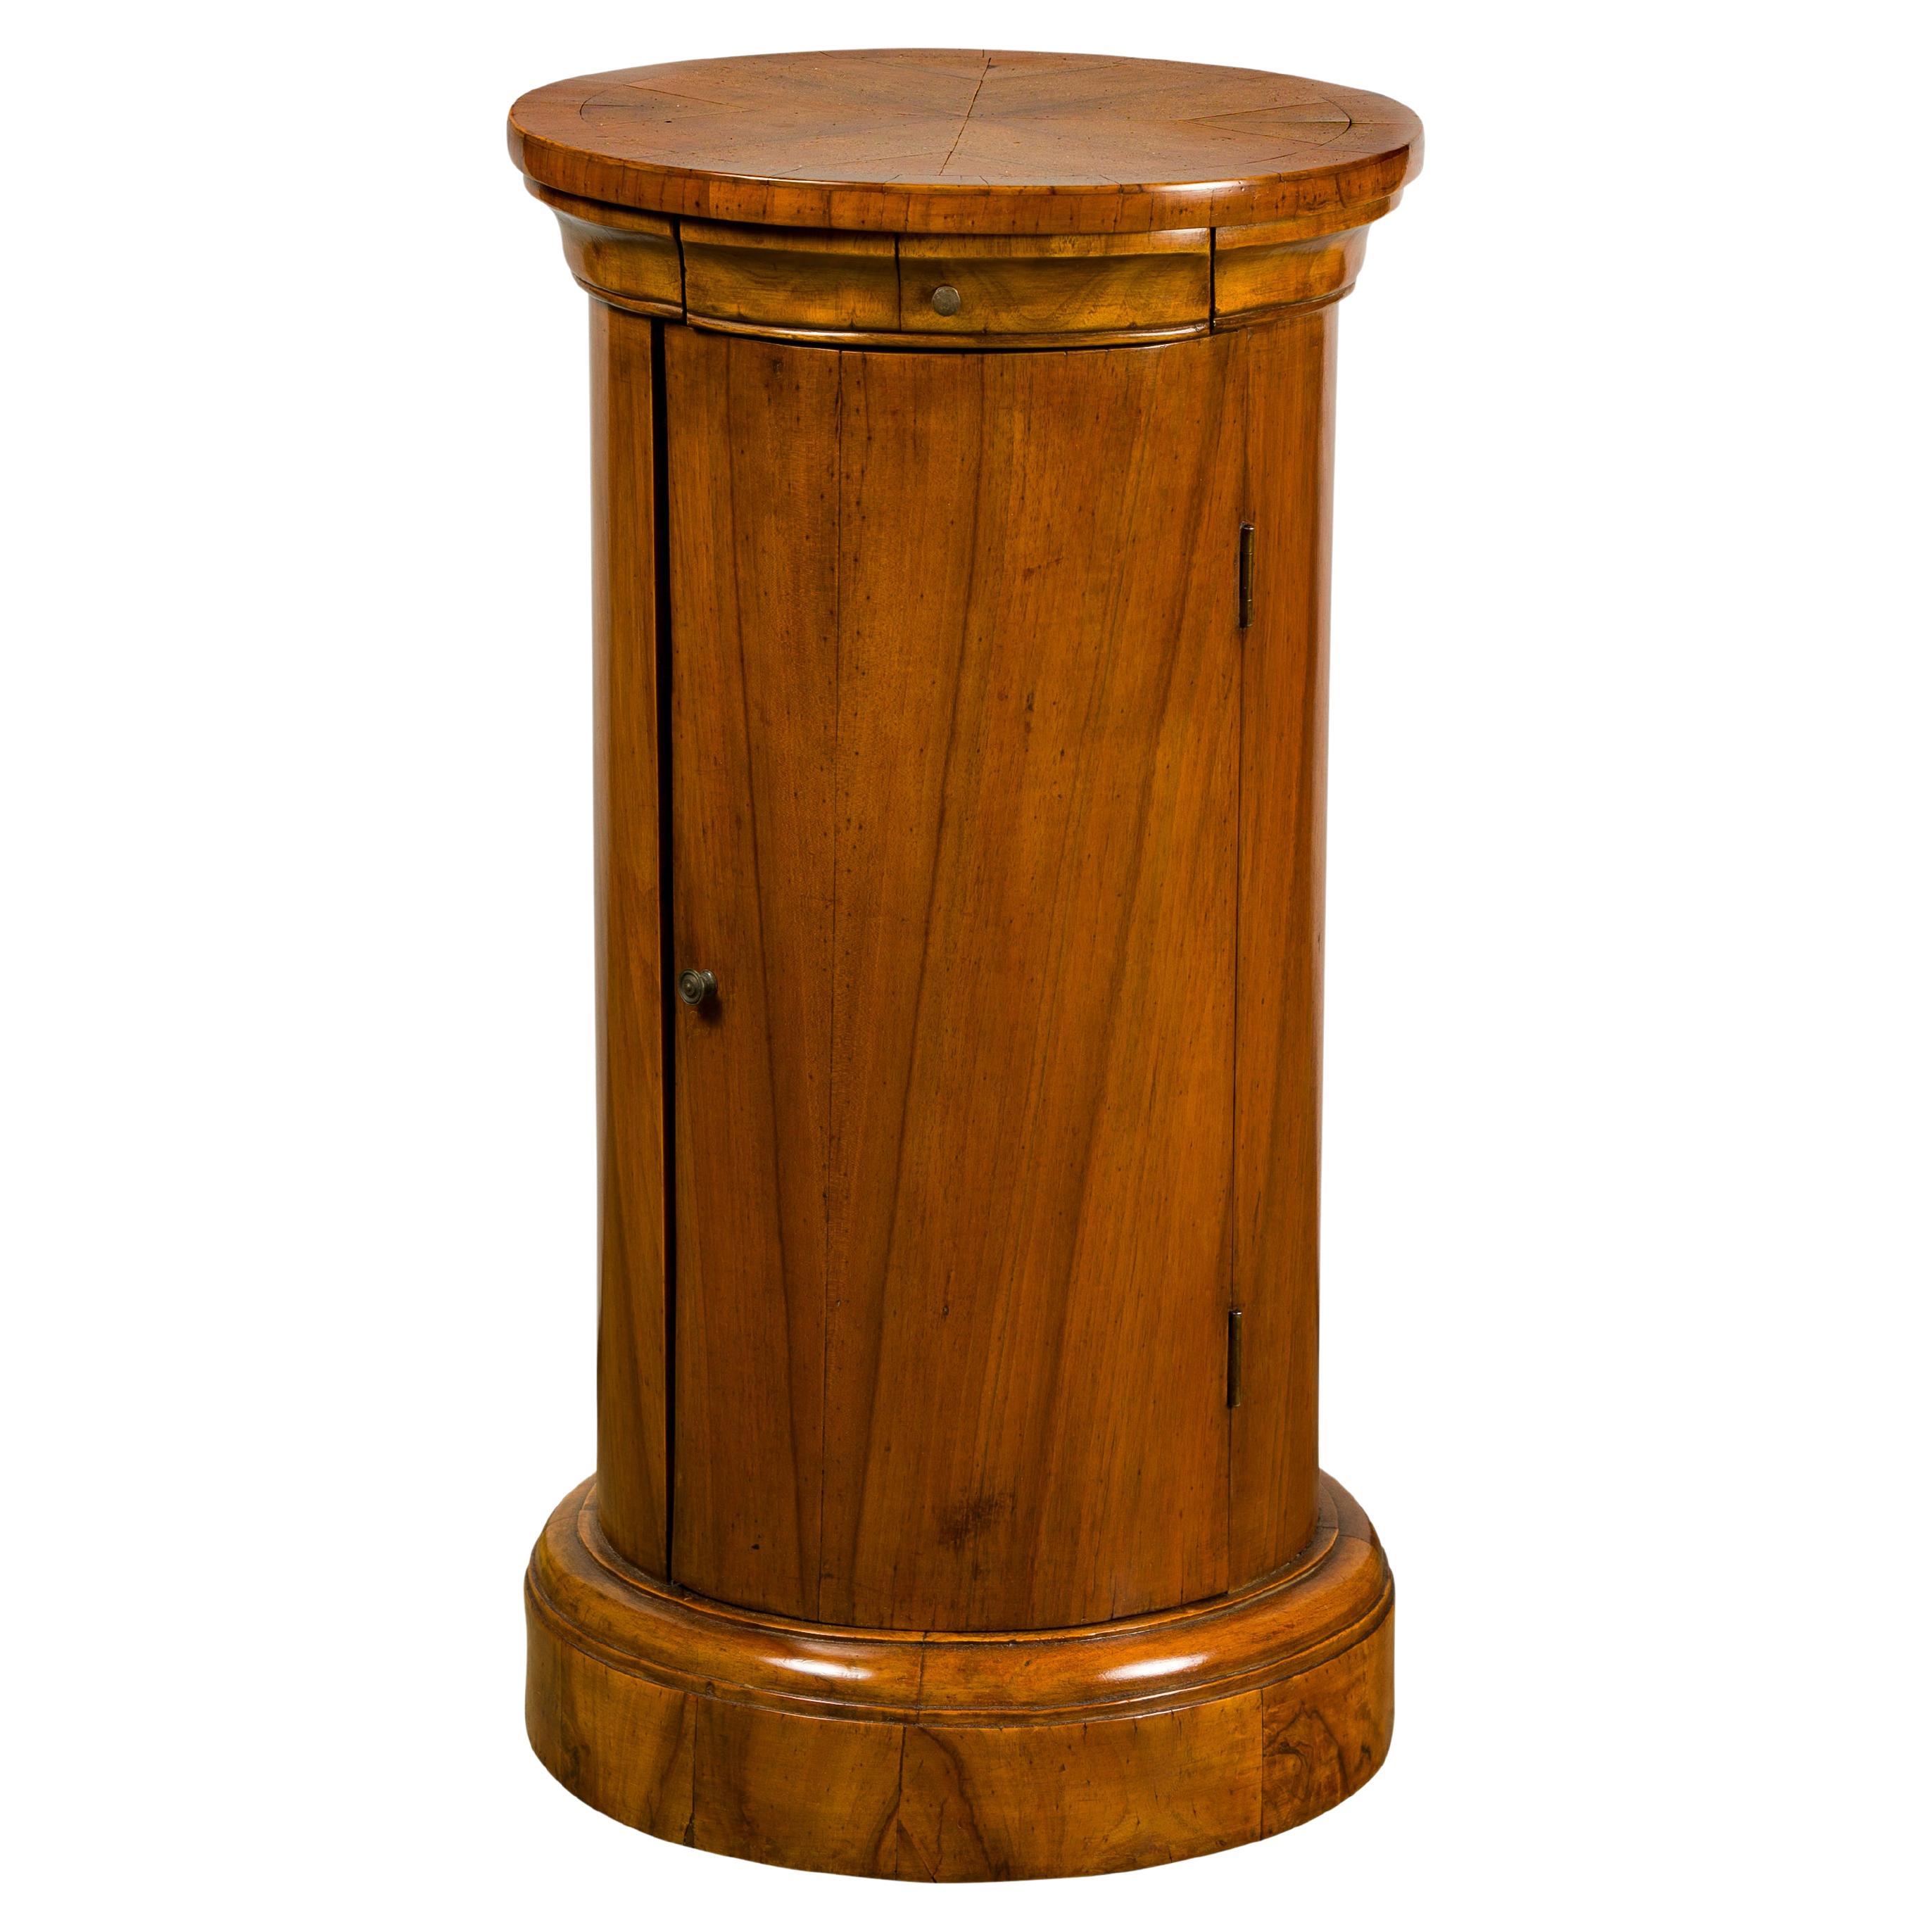 Italian 19th Century Walnut Drum Table with Single Door and Bookmatched Top